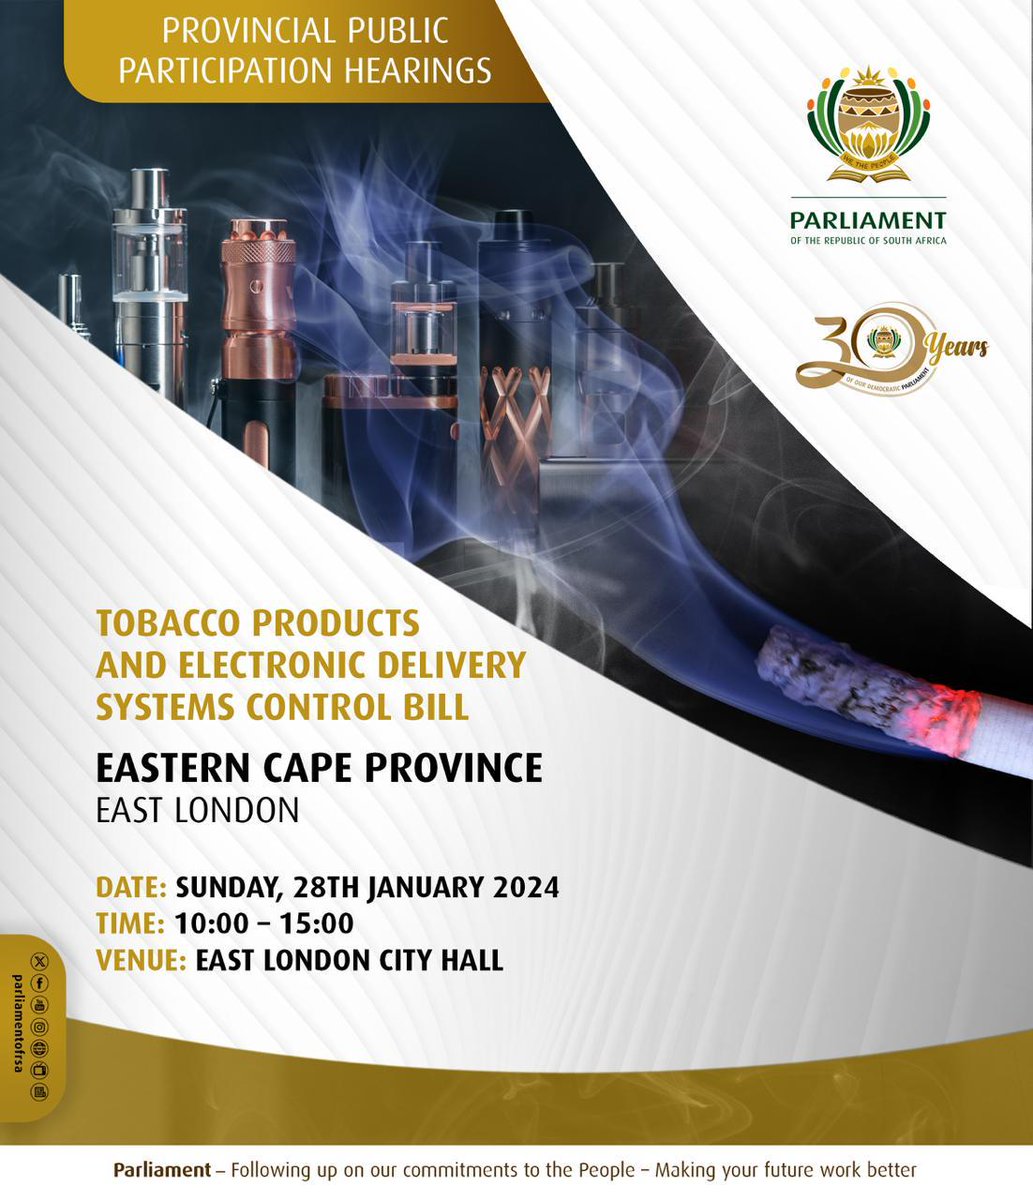 It is the Eastern Cape's turn to make inputs on the Tobacco Products and Electronic Delivery Systems Control Bill #TobaccoBill. The public hearings will be held in #Butterworth #QueensTown and #EastLondon #PublicParticipation